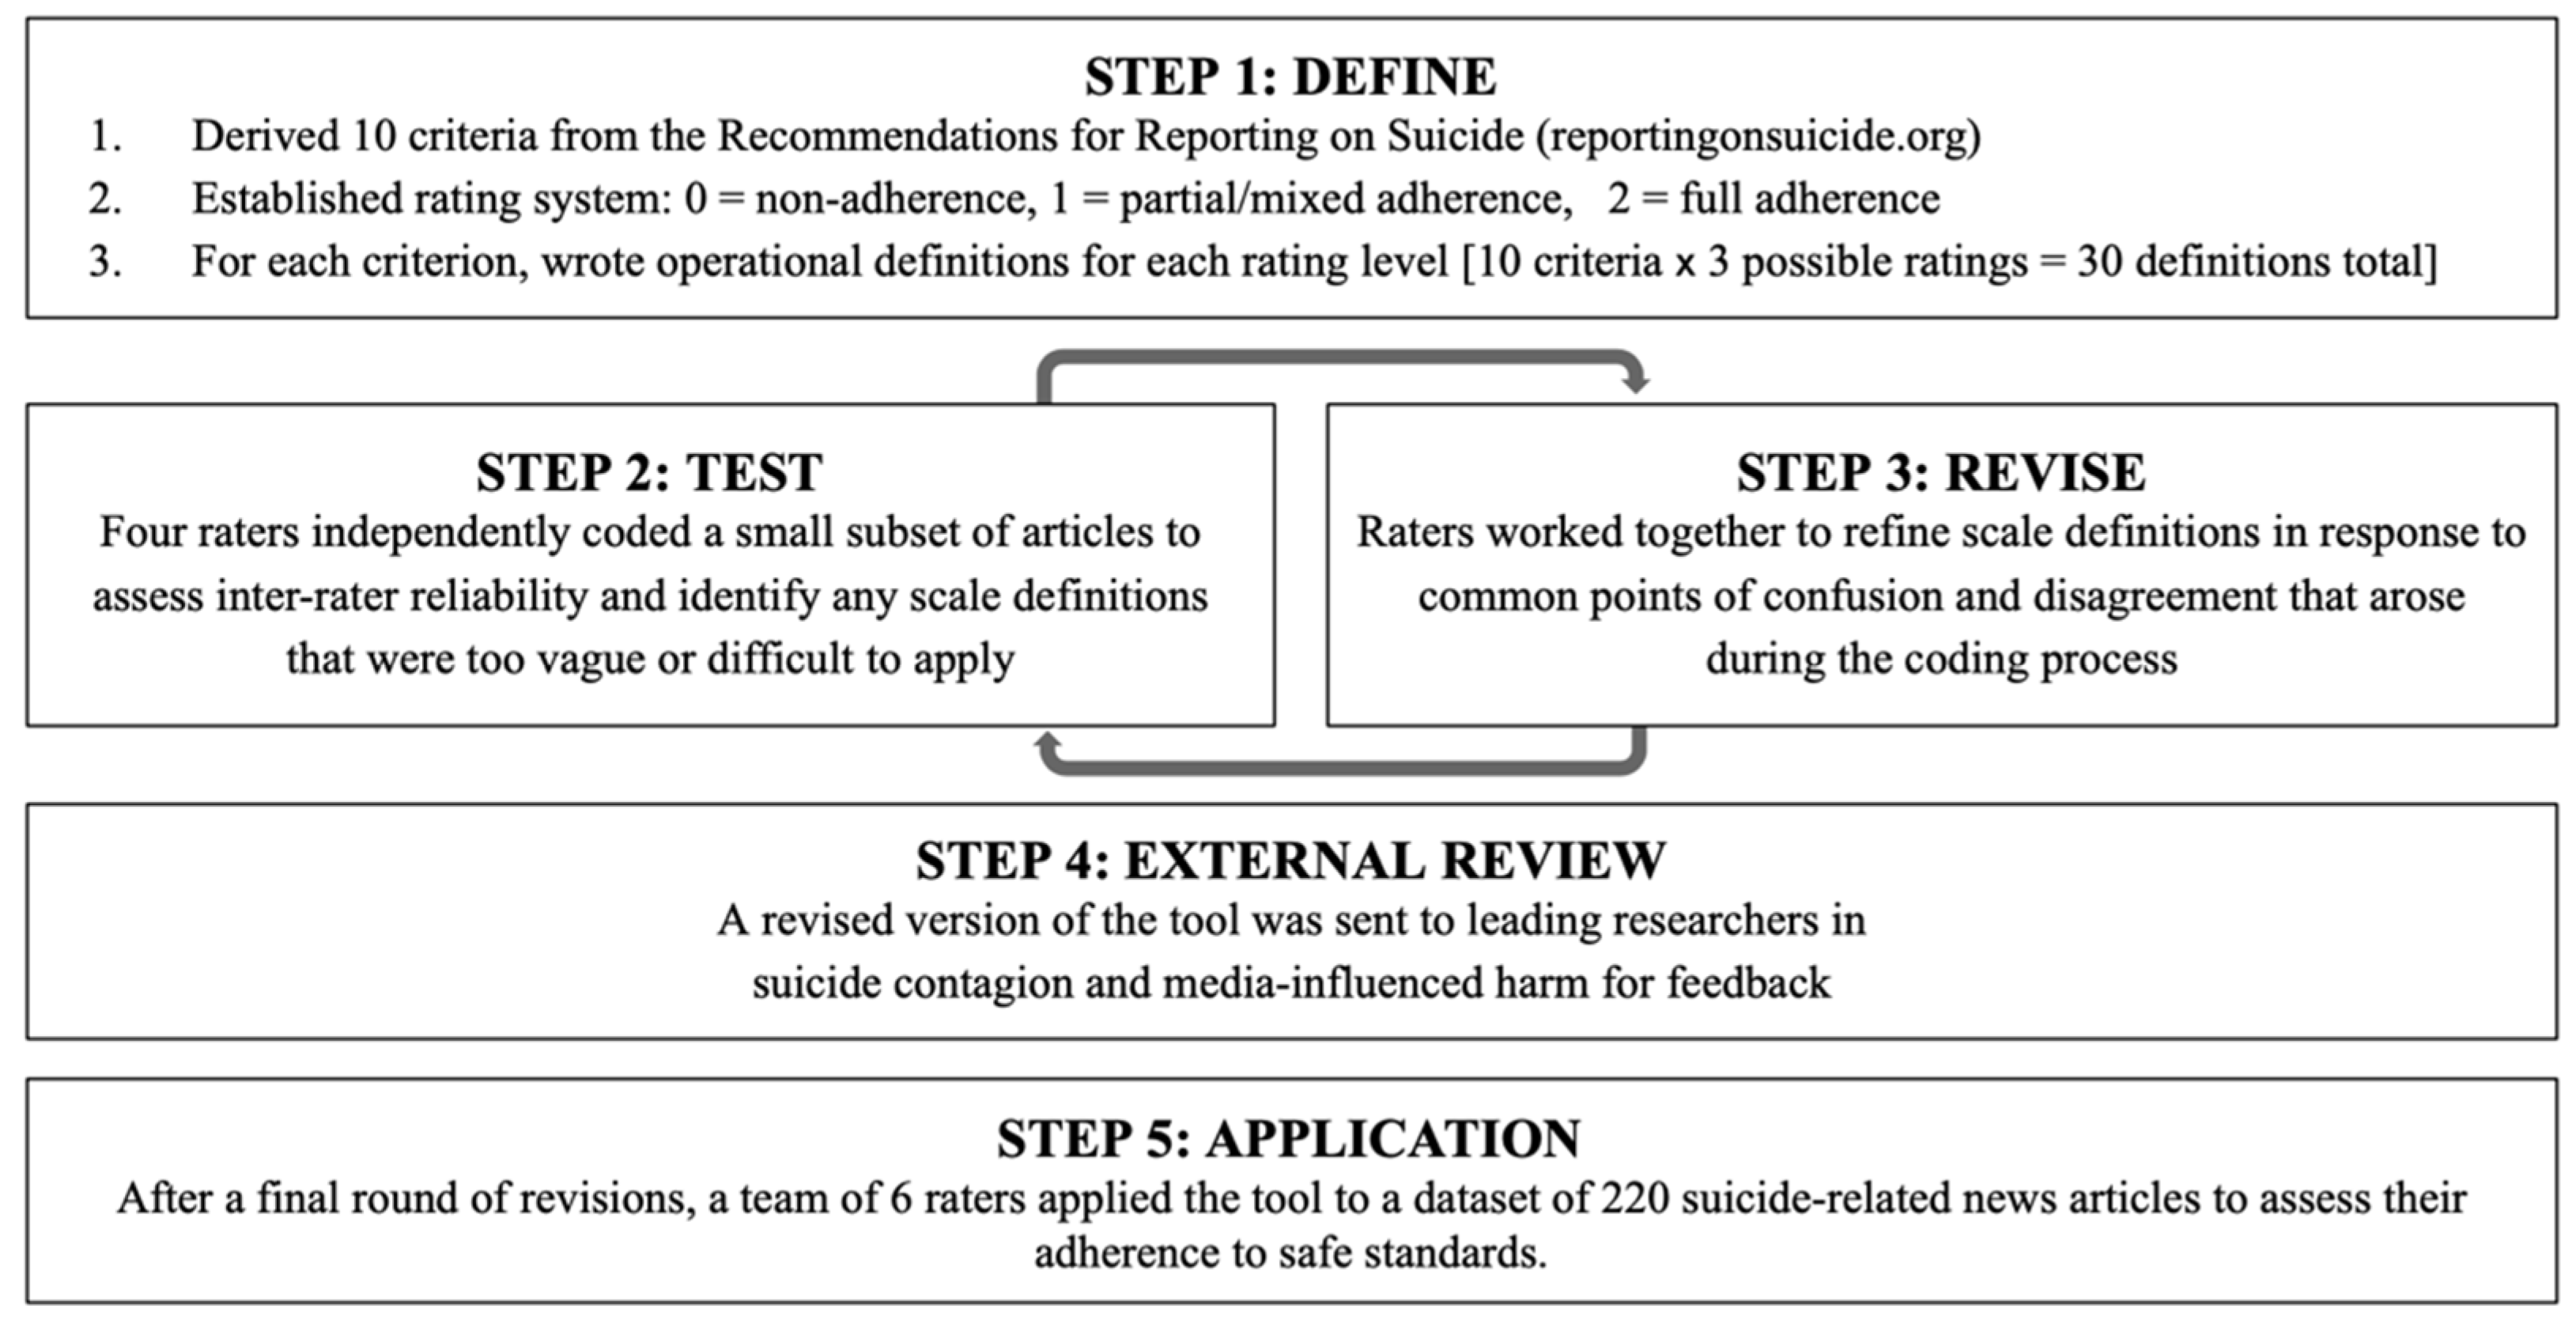 IJERPH | Free Full-Text | The Tool for Evaluating Media Portrayals of  Suicide (TEMPOS): Development and Application of a Novel Rating Scale to  Reduce Suicide Contagion